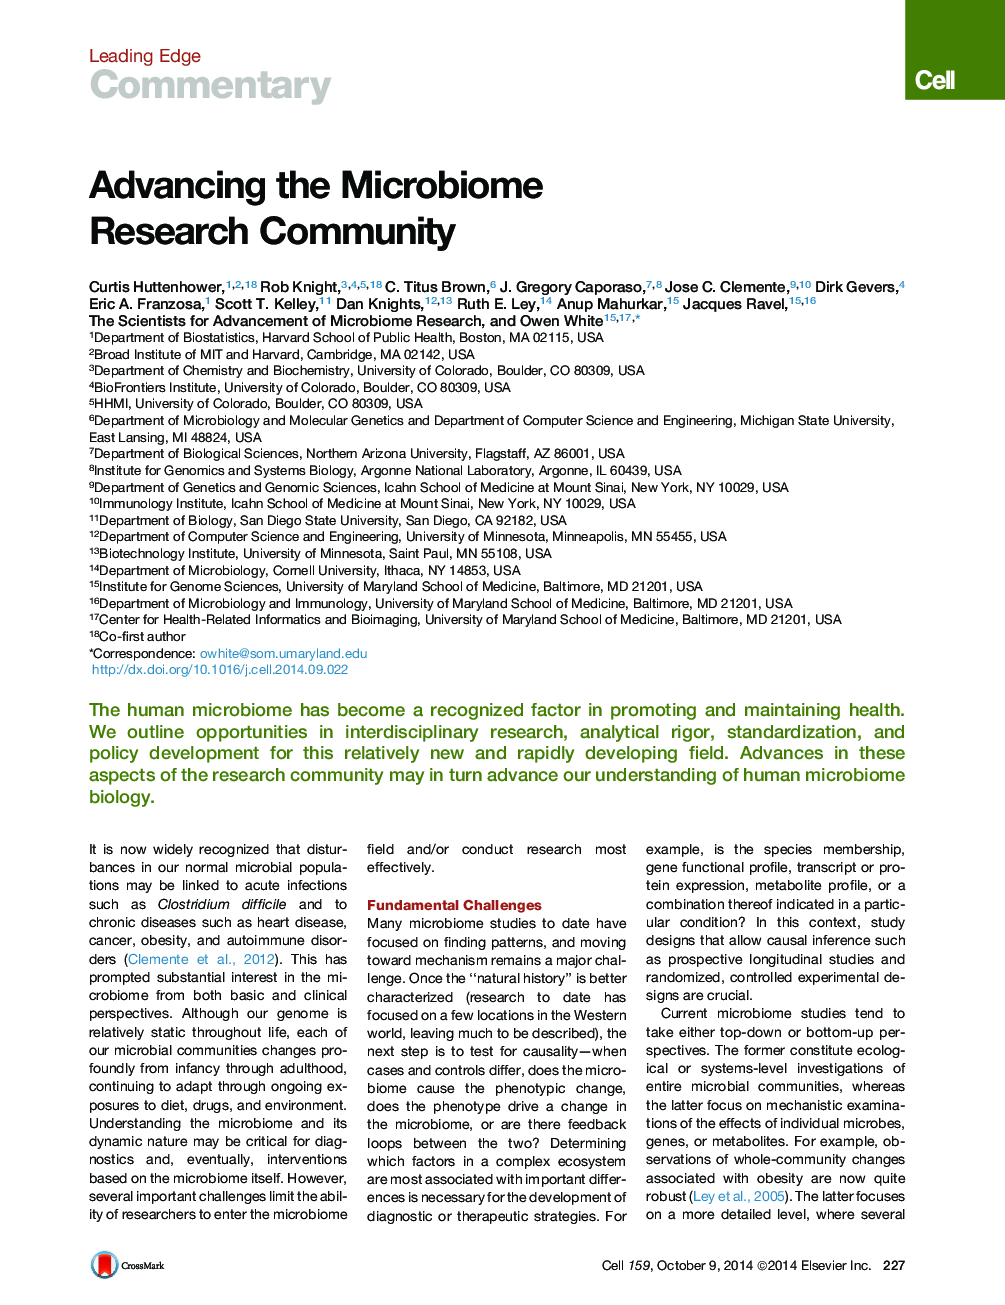 Advancing the Microbiome Research Community